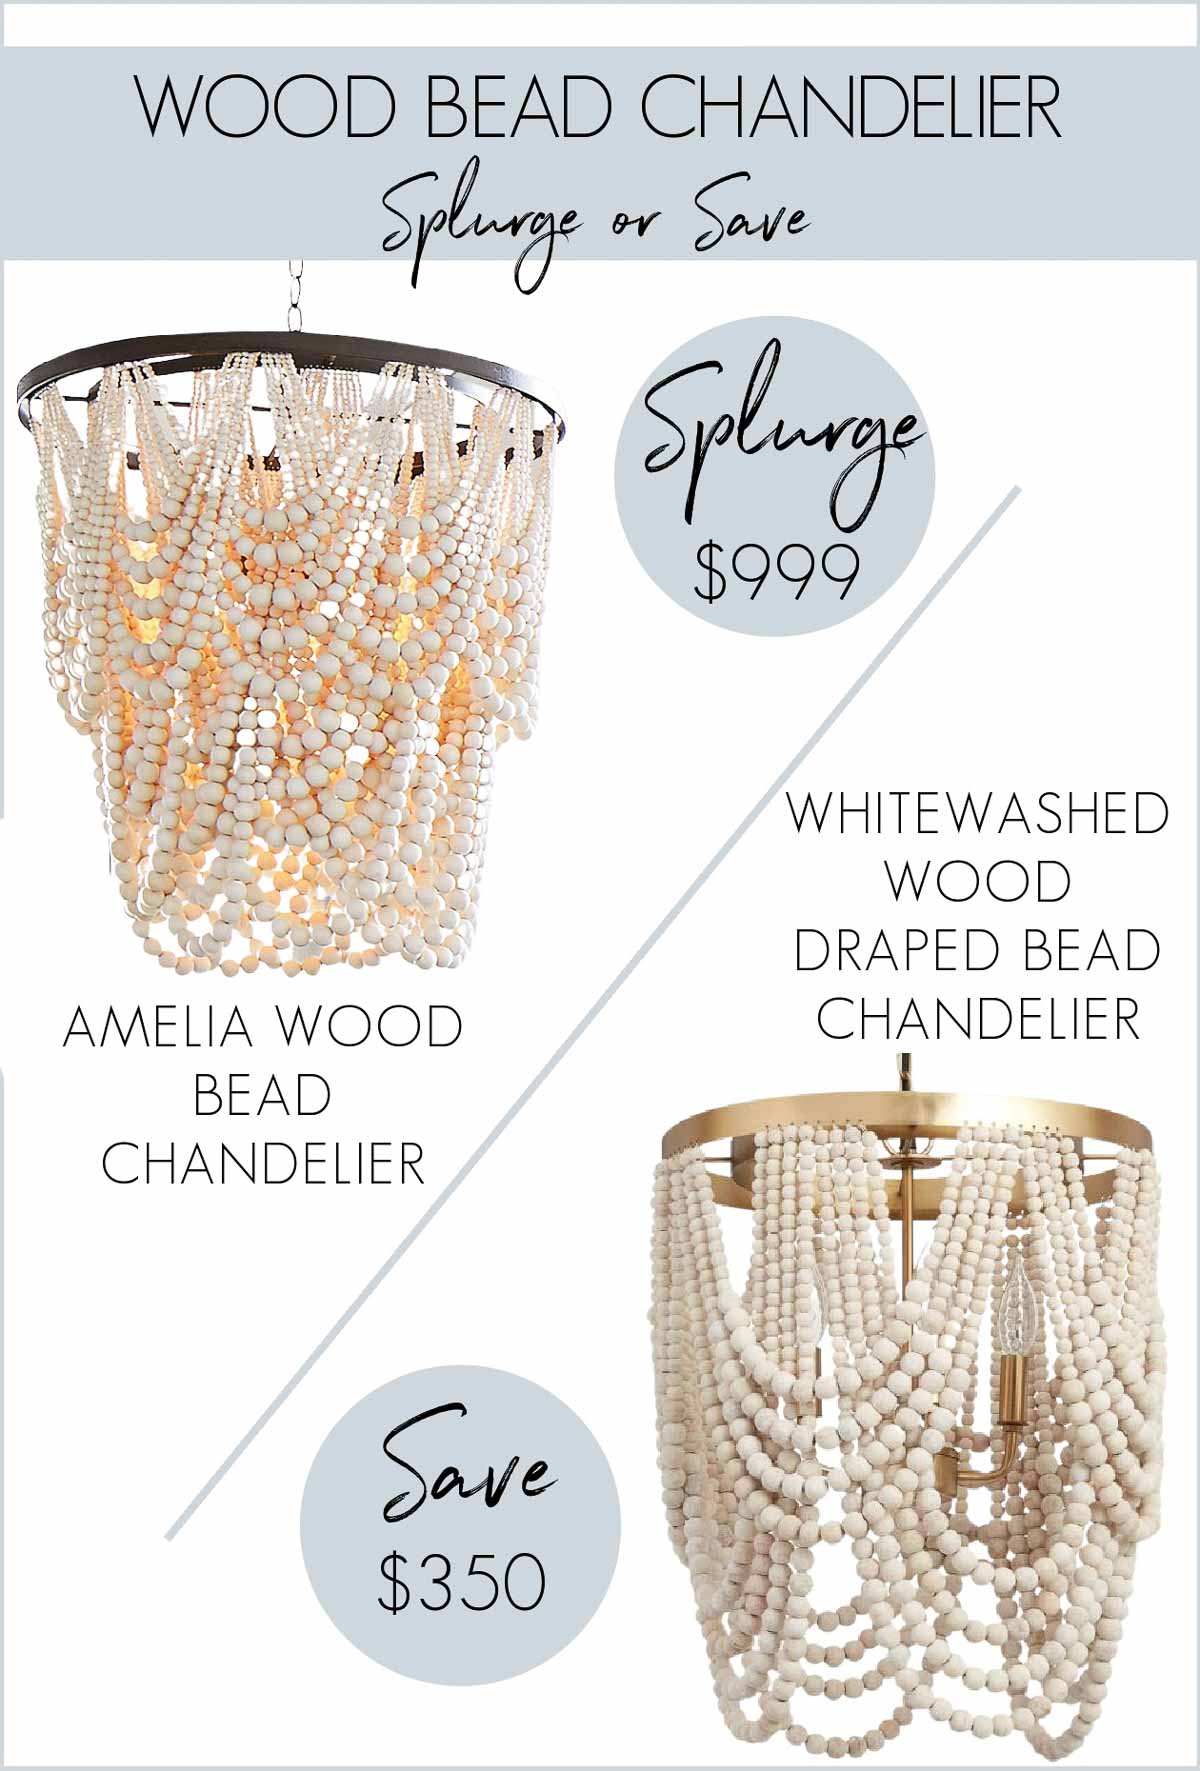 Beaded chandelier look for less - a favorite cheap home decor find!